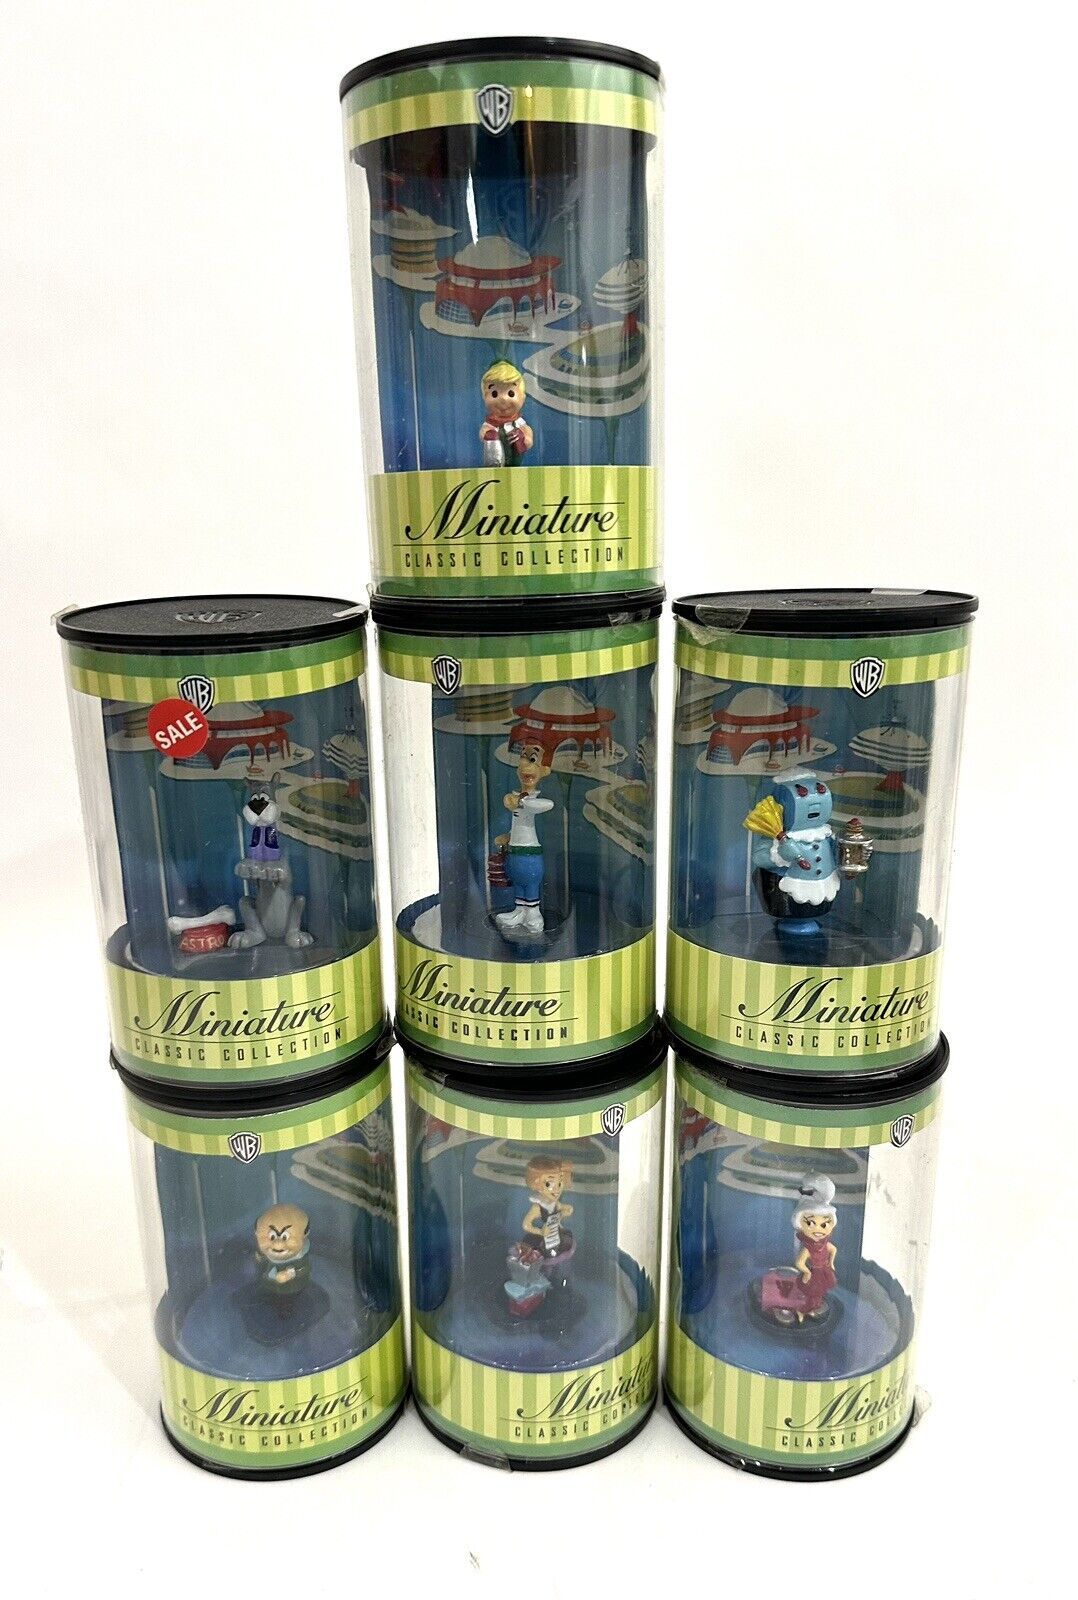 1999 VTG Warner Bros Miniature Classic Collection The Jetsons Complete Set of 7